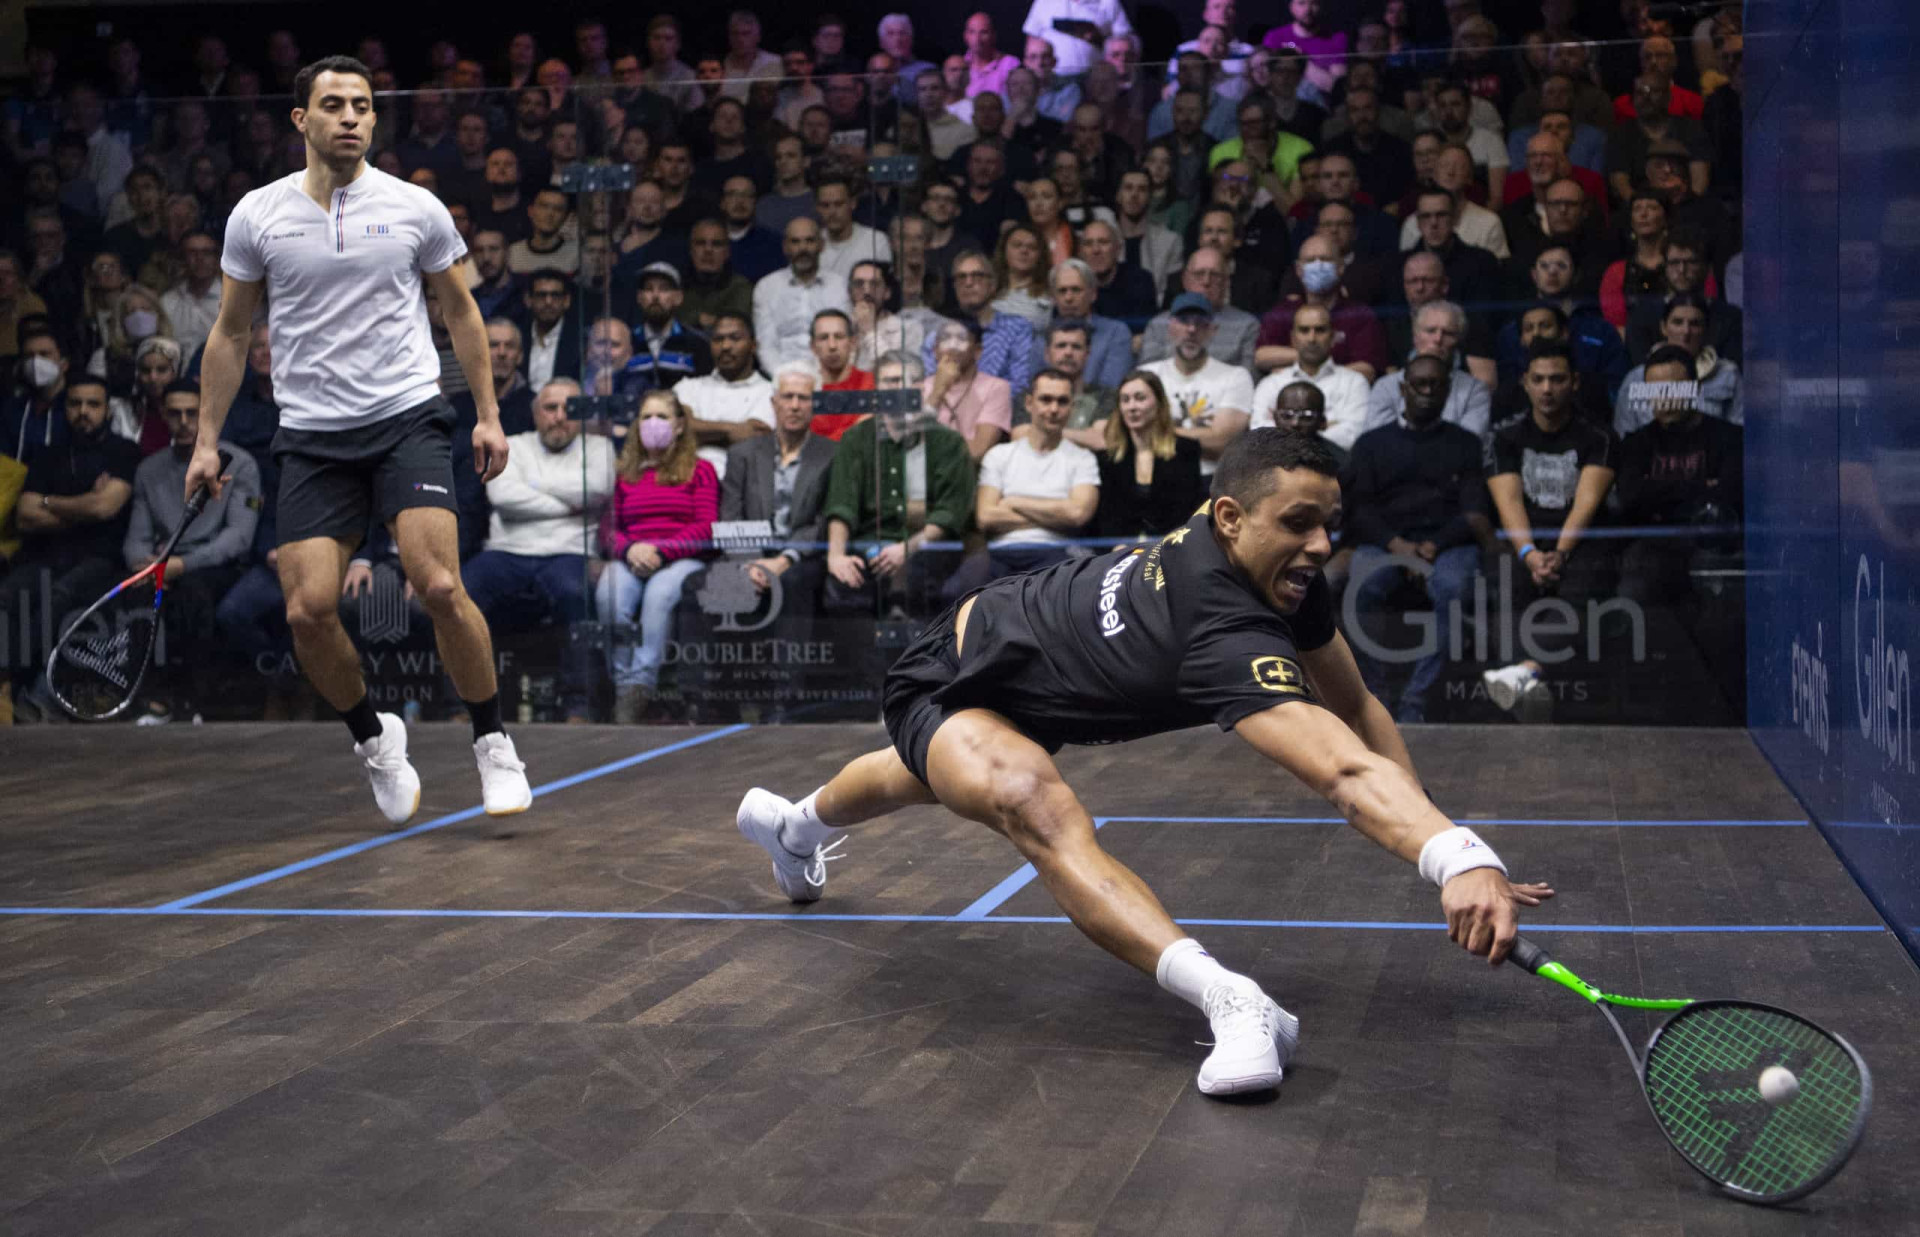 <p>Squash has its origins in the aforementioned real tennis but was only developed as a sport on its own about 150 years ago. It's played by two or four players in a four-walled court with a small, hollow rubber ball.</p><p>You may also like:<a href="https://www.starsinsider.com/n/262525?utm_source=msn.com&utm_medium=display&utm_campaign=referral_description&utm_content=507681v1en-ph"> The most beautiful sunsets in the UK</a></p>